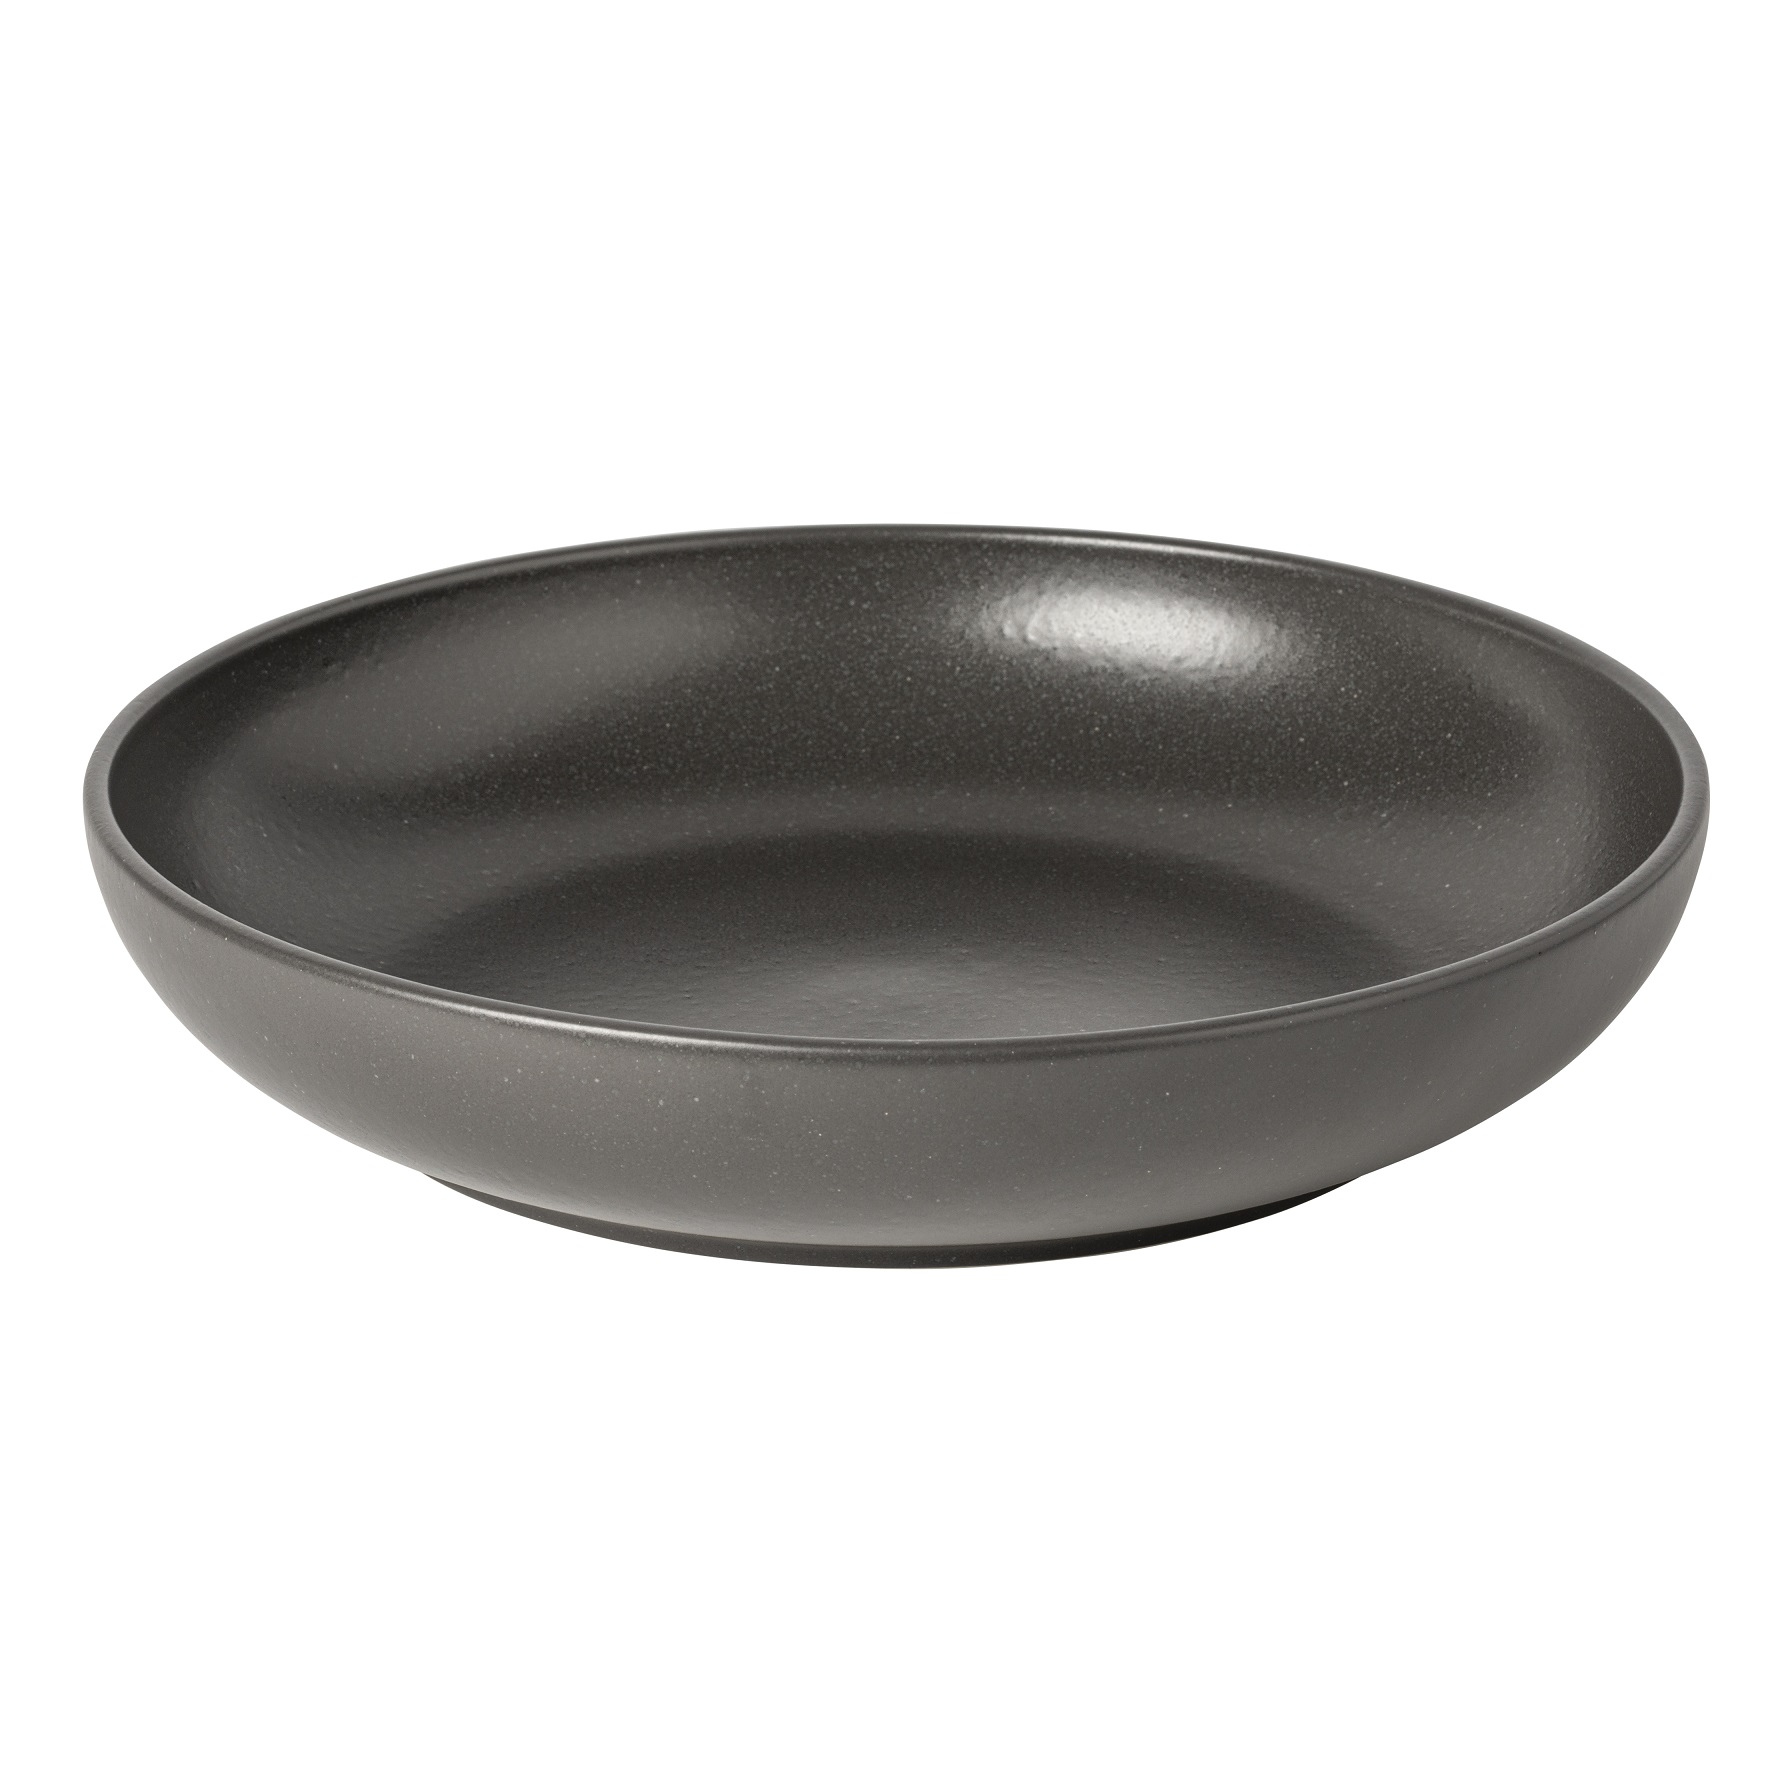 Pacifica Seed Grey Serving Bowl 32cm Gift